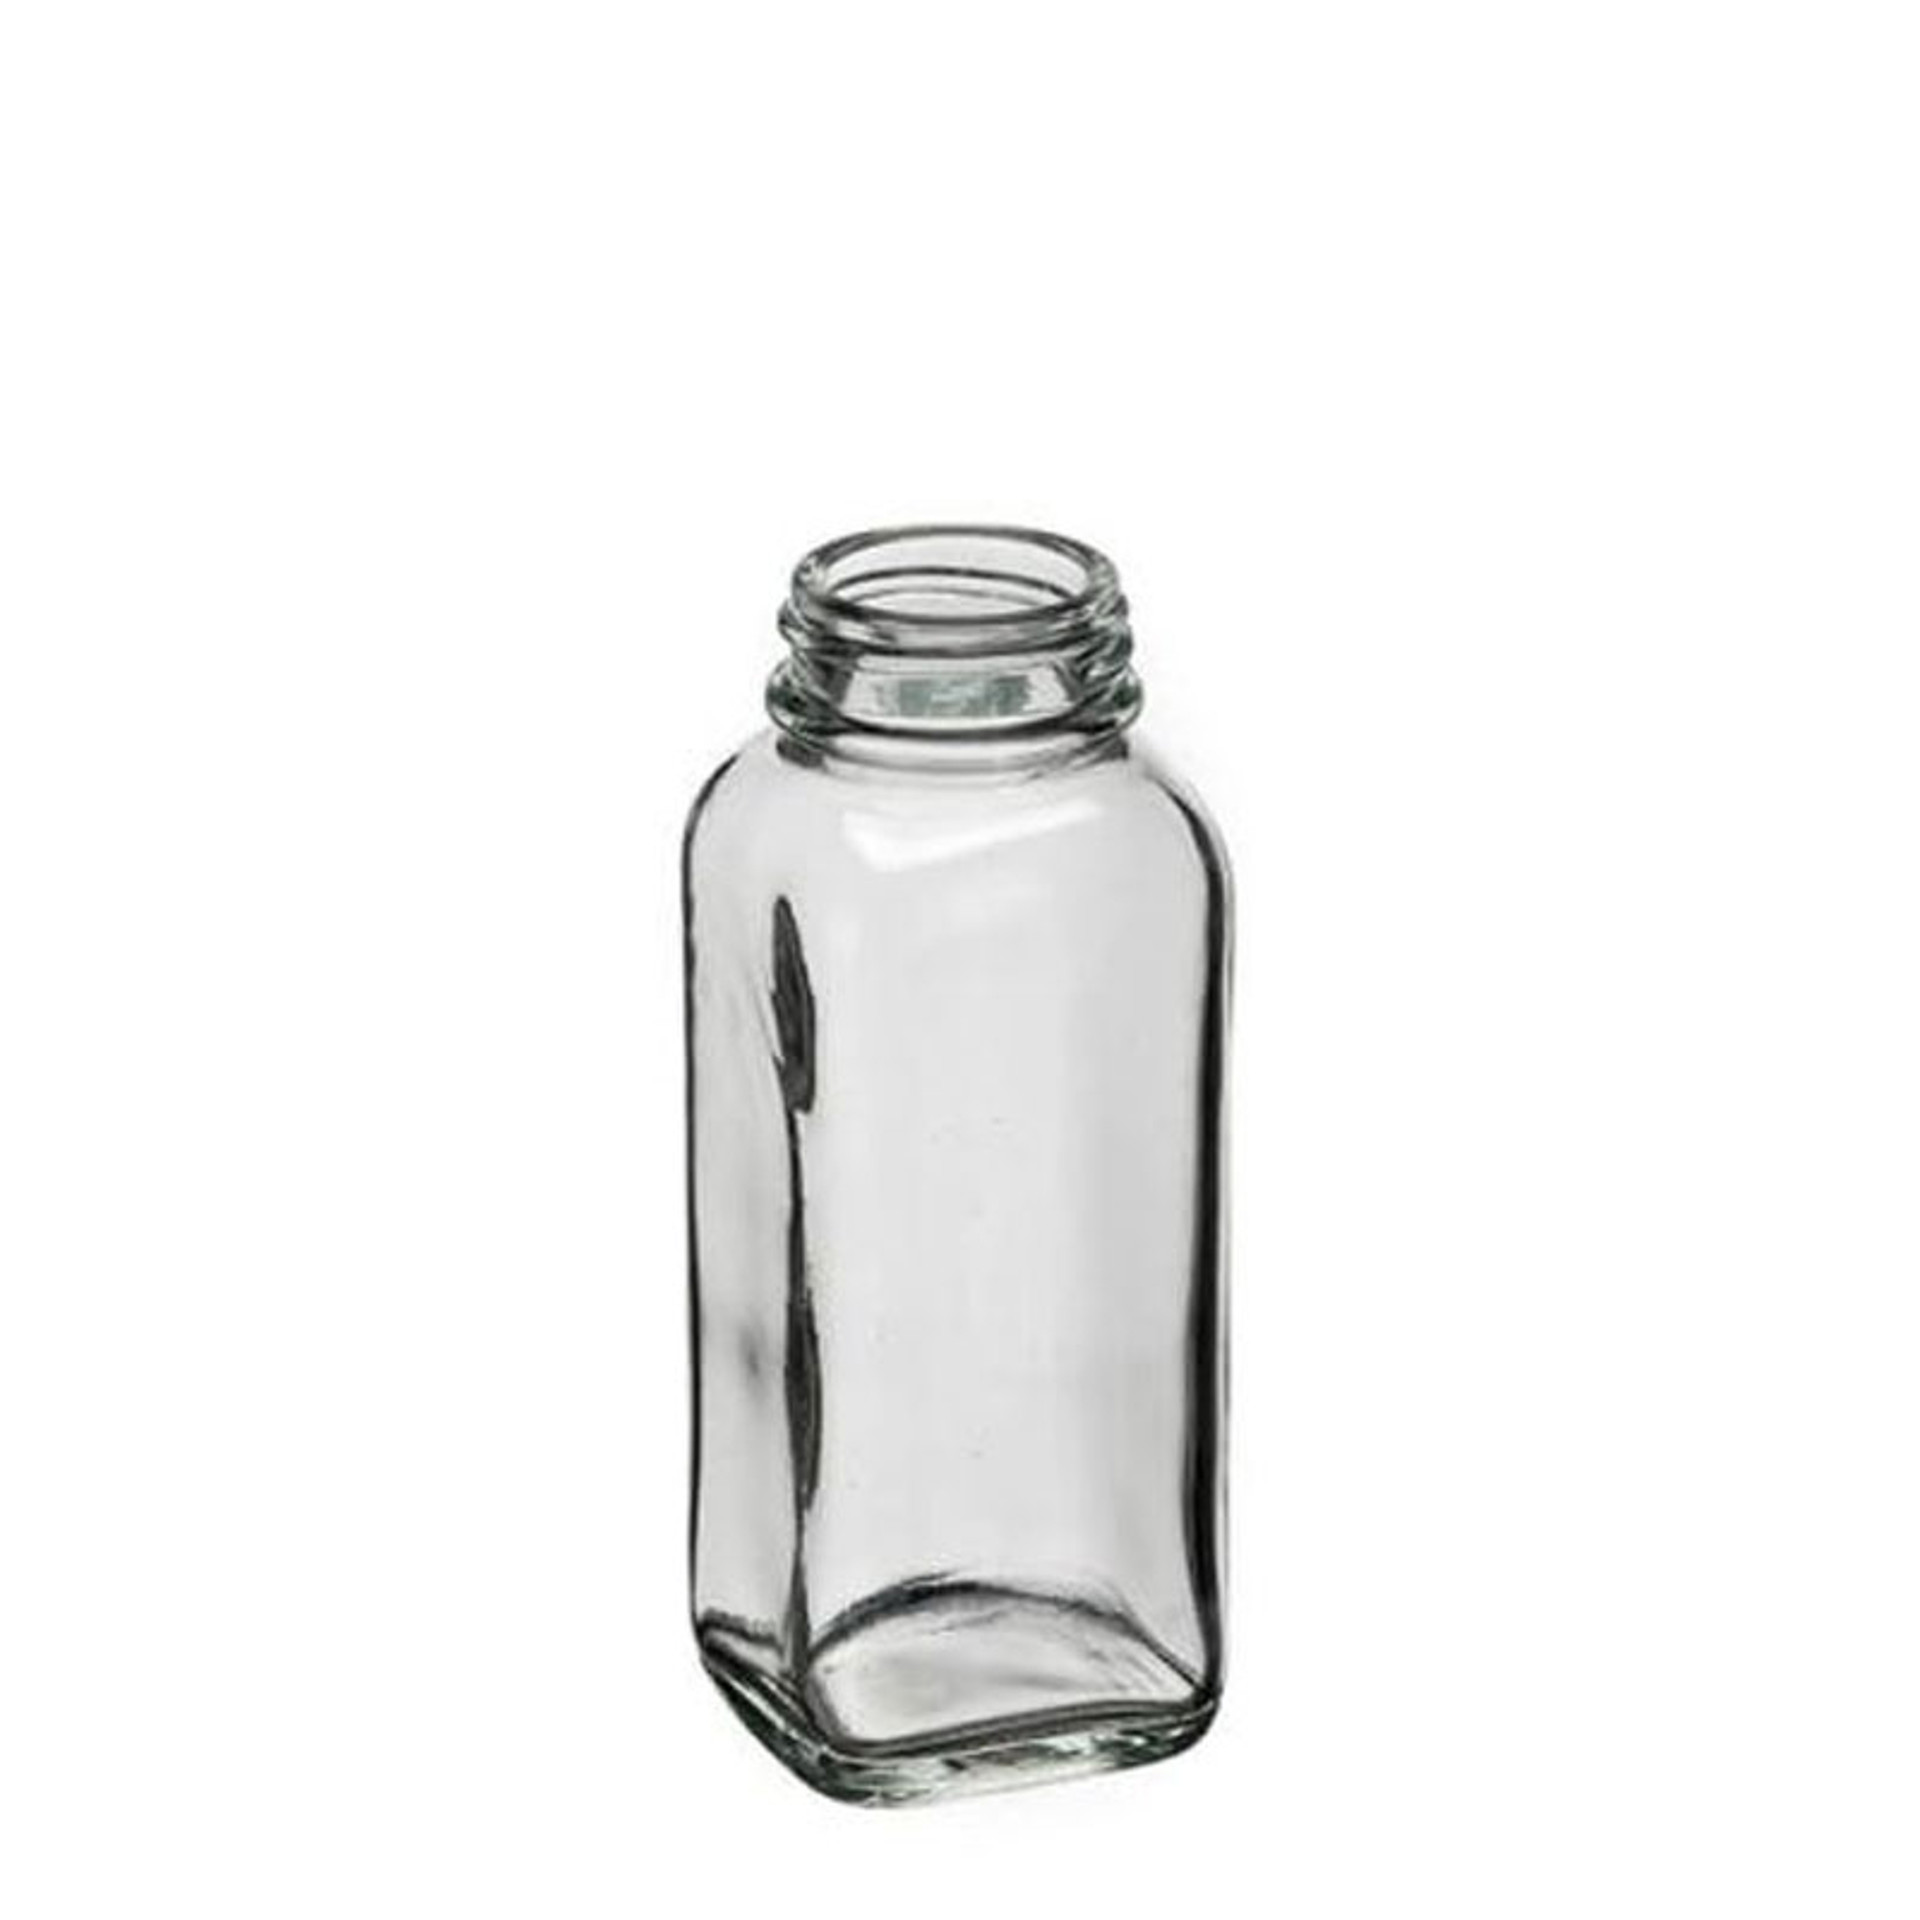 8 Pieces Of French Square Glass Spice Bottles 8 Oz Spice Jars With Silver  Metal